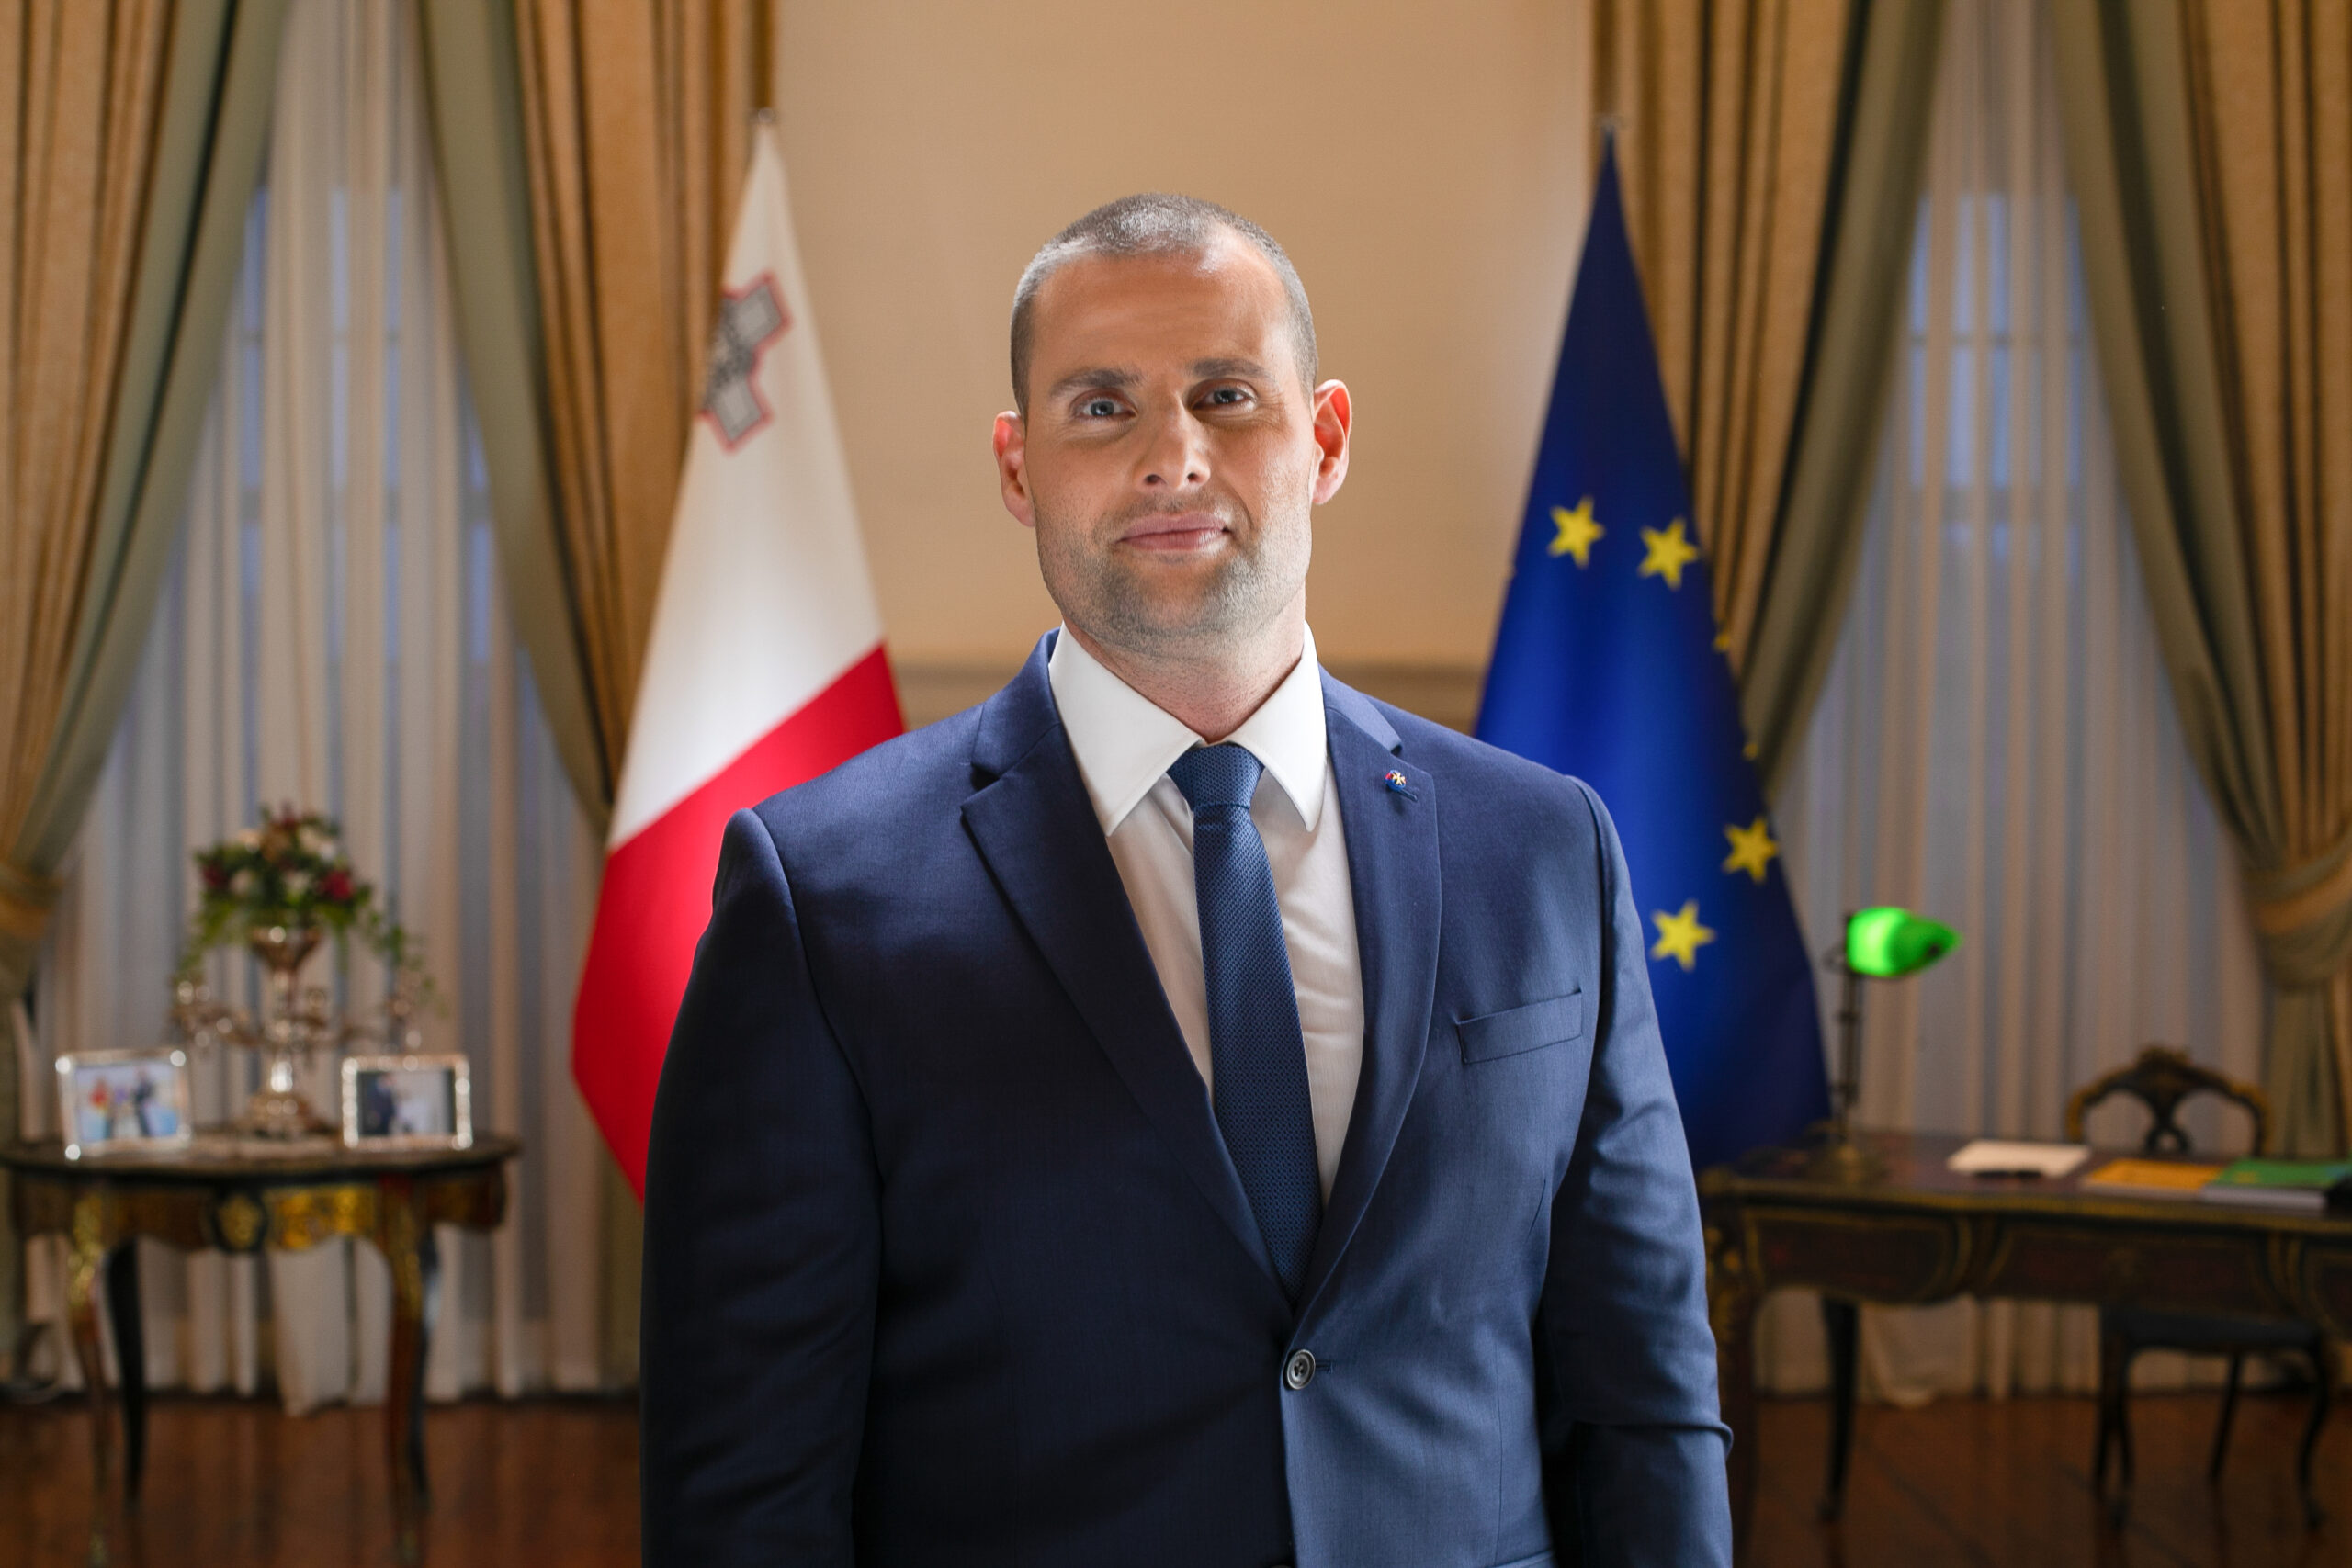 Prime Minister acknowledges forward thinking approach of The Malta Chamber